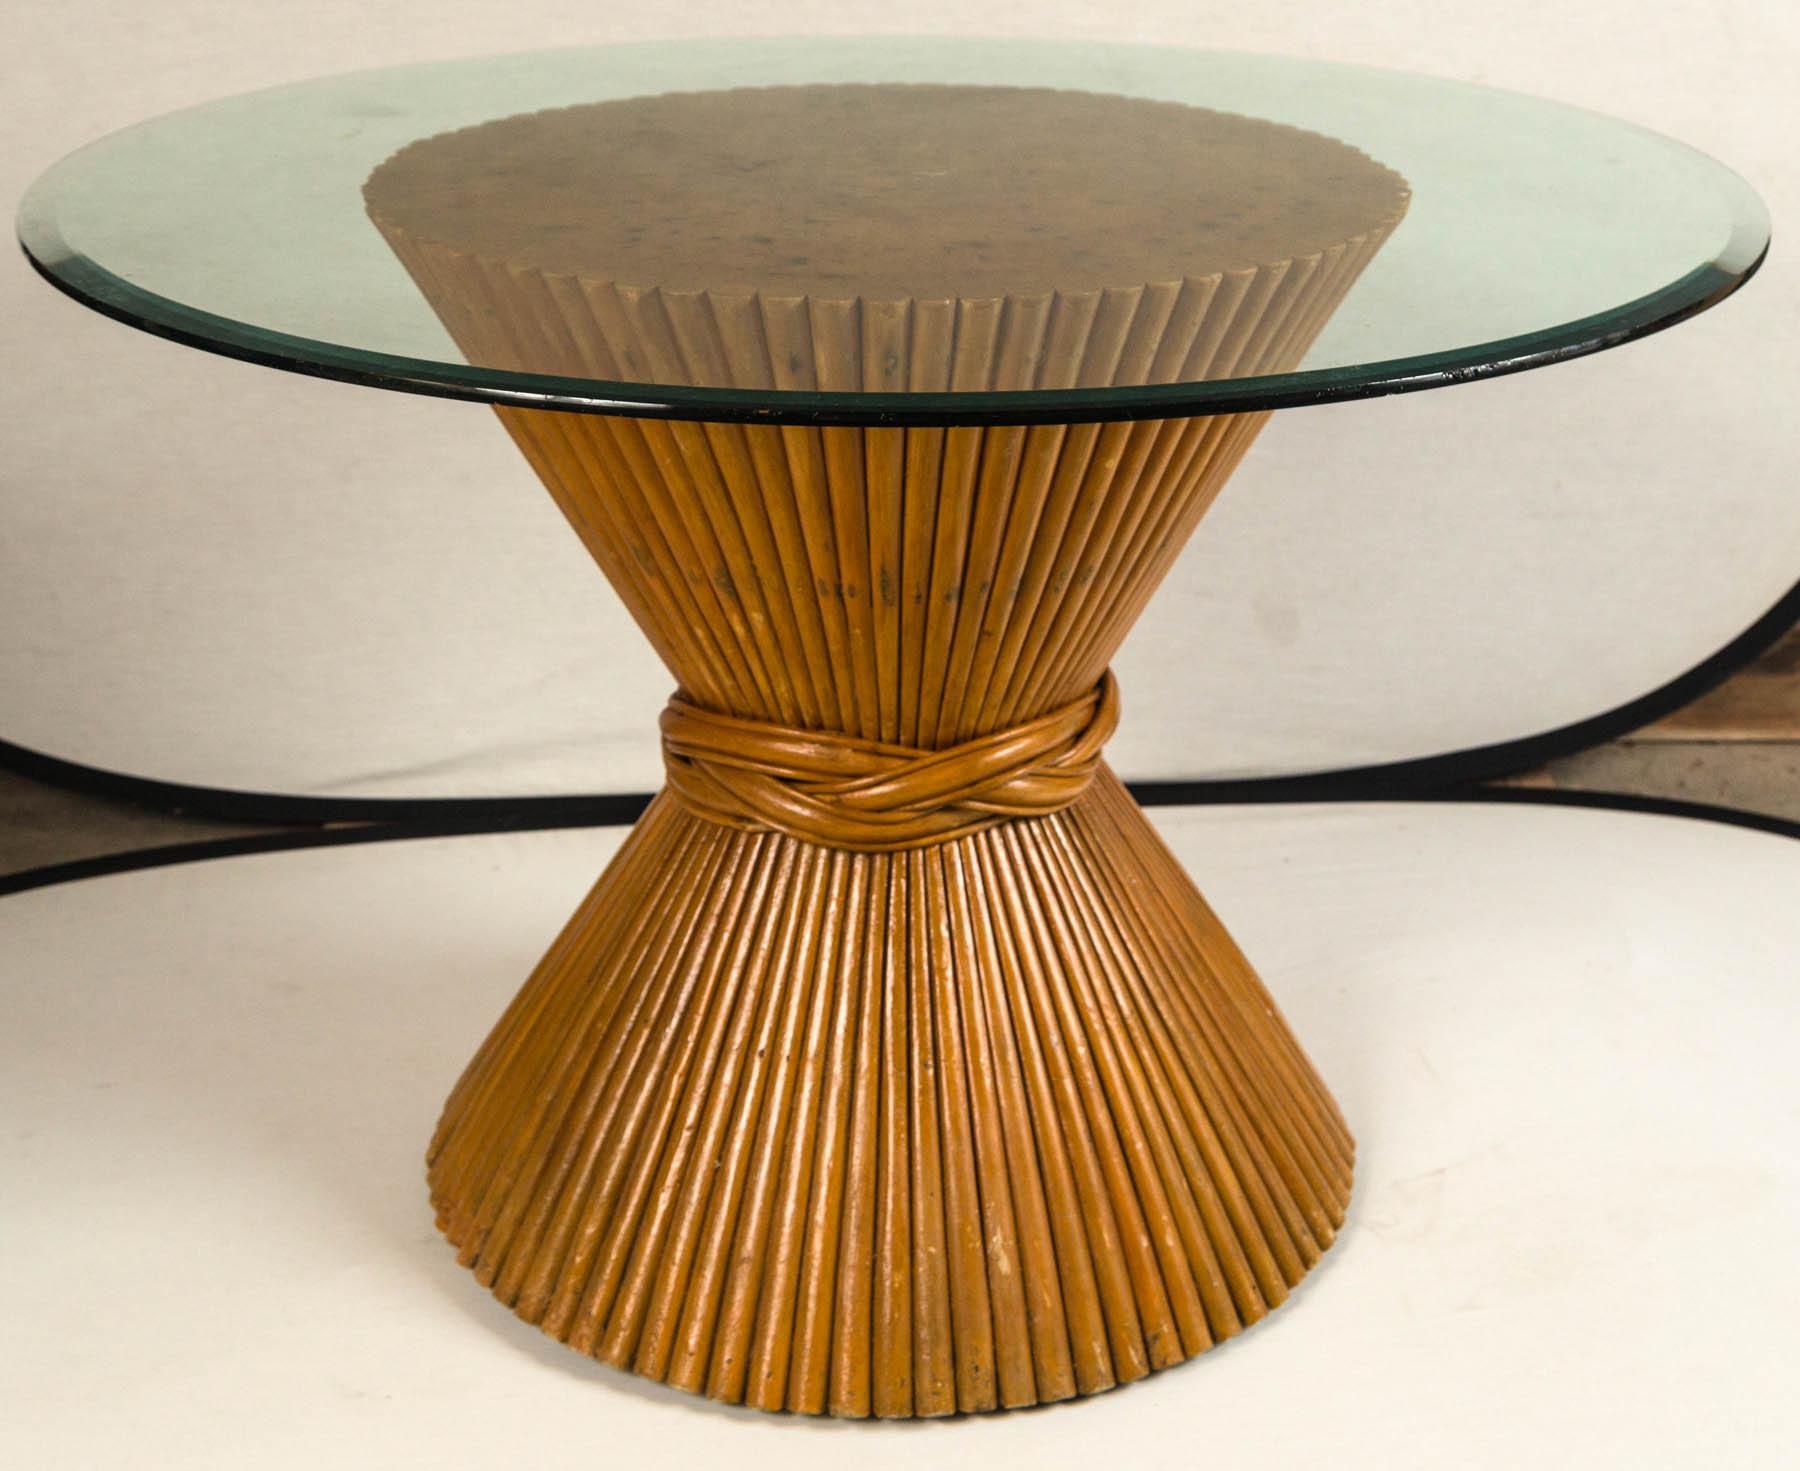 Vintage McGuire bamboo pedestal table. Sheaf of wheat design base with glass top. Original finish with aged patina. An iconic design by Eleanor and John McGuire.